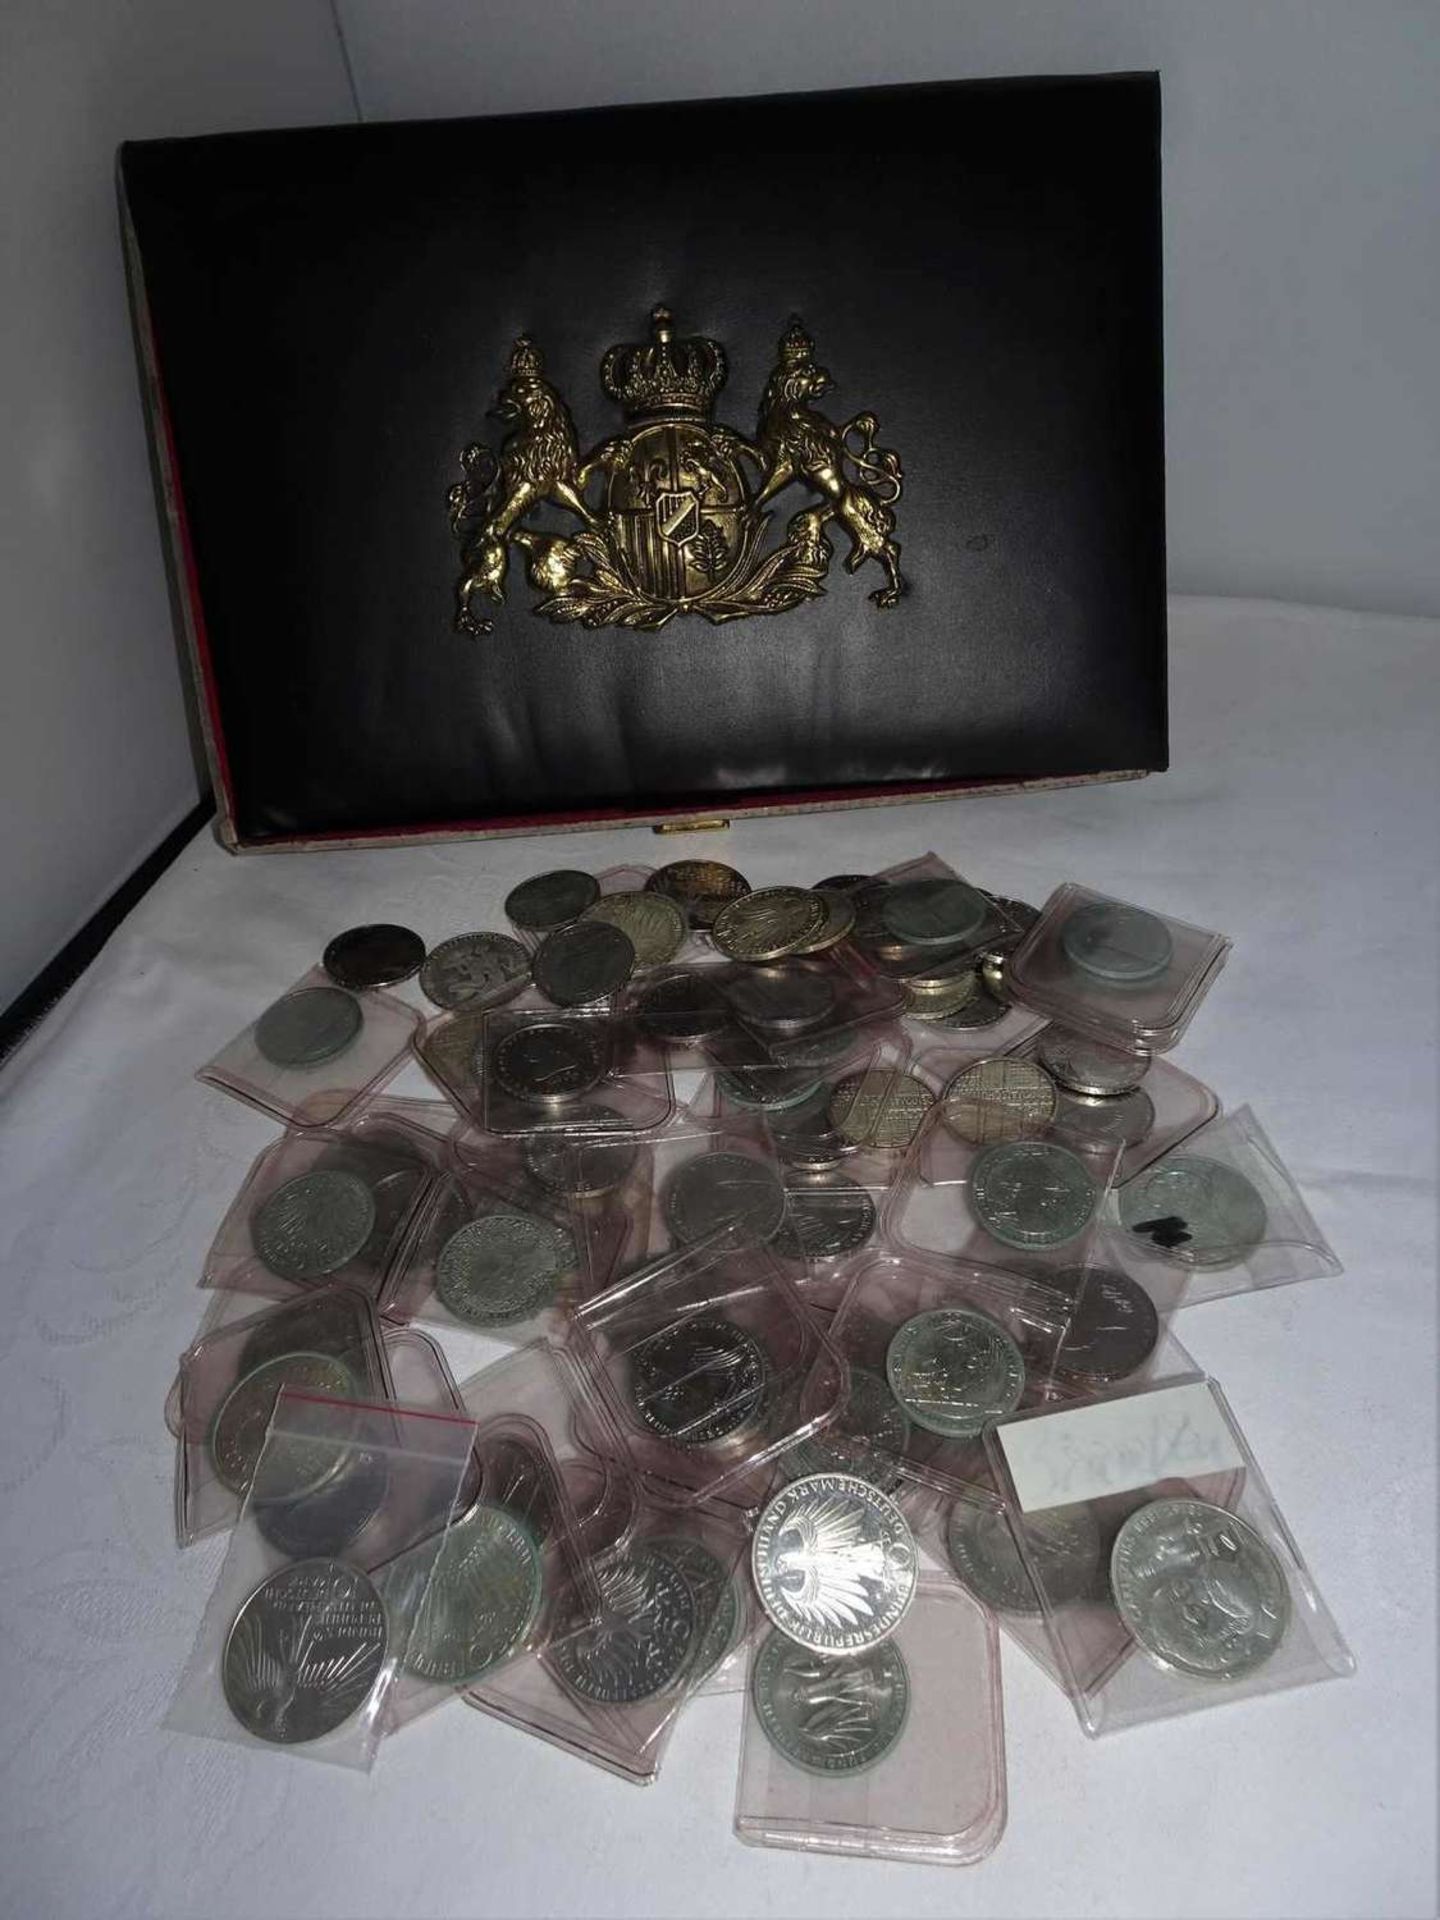 Lot FRG coins, 5 and 10 DM pieces, thereby 61x 5 DM, 15x 10 DM, a total of 455 DM. - Image 2 of 4